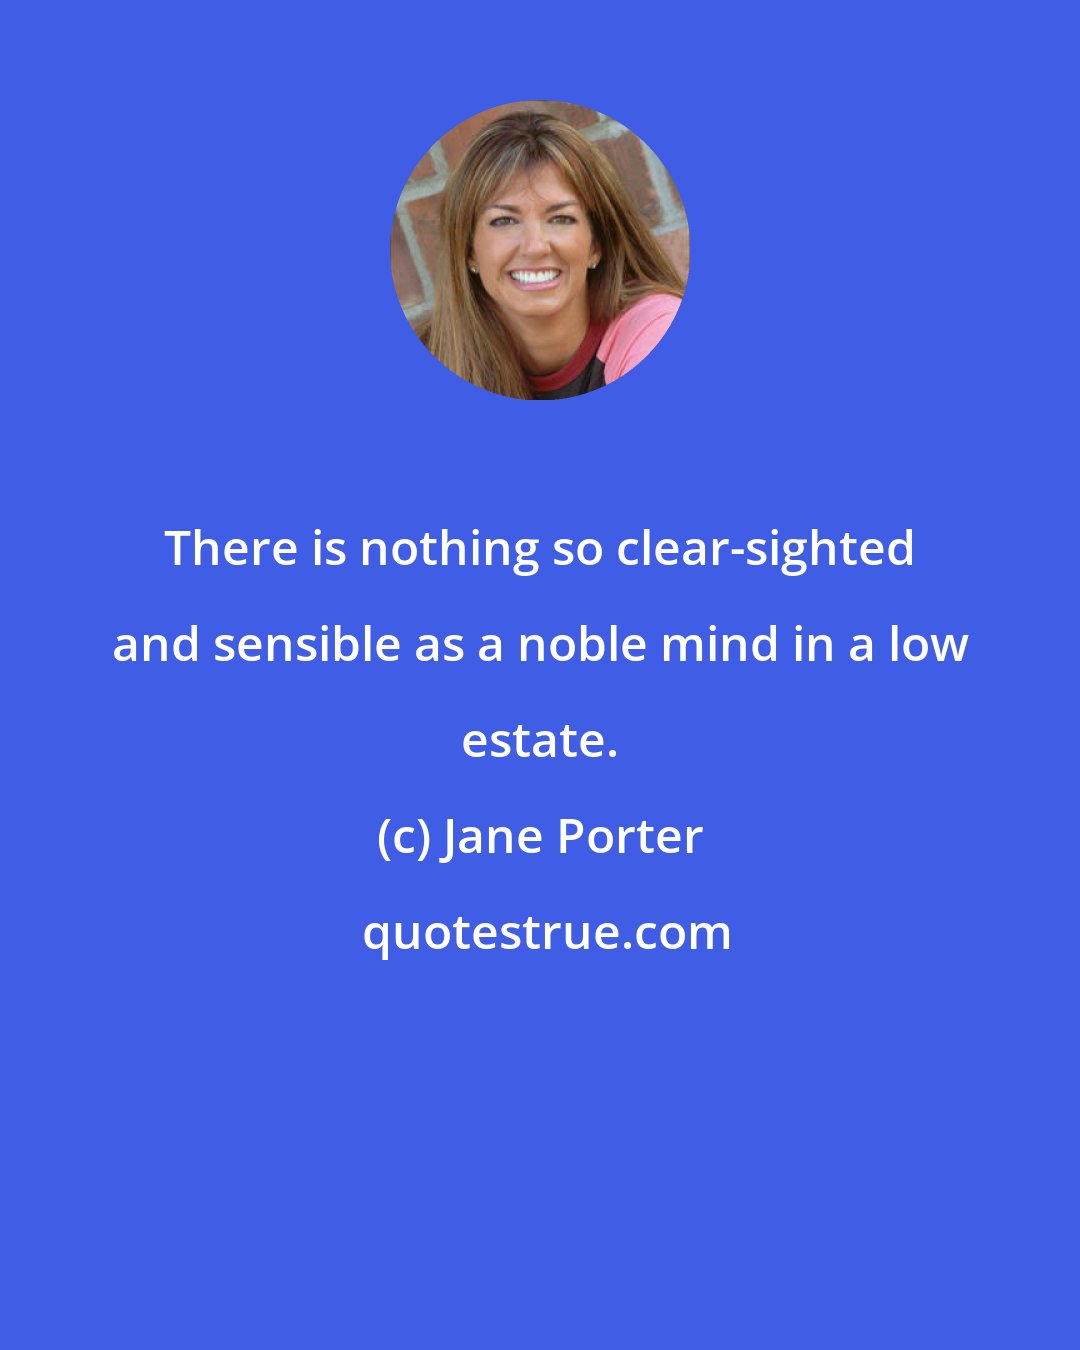 Jane Porter: There is nothing so clear-sighted and sensible as a noble mind in a low estate.